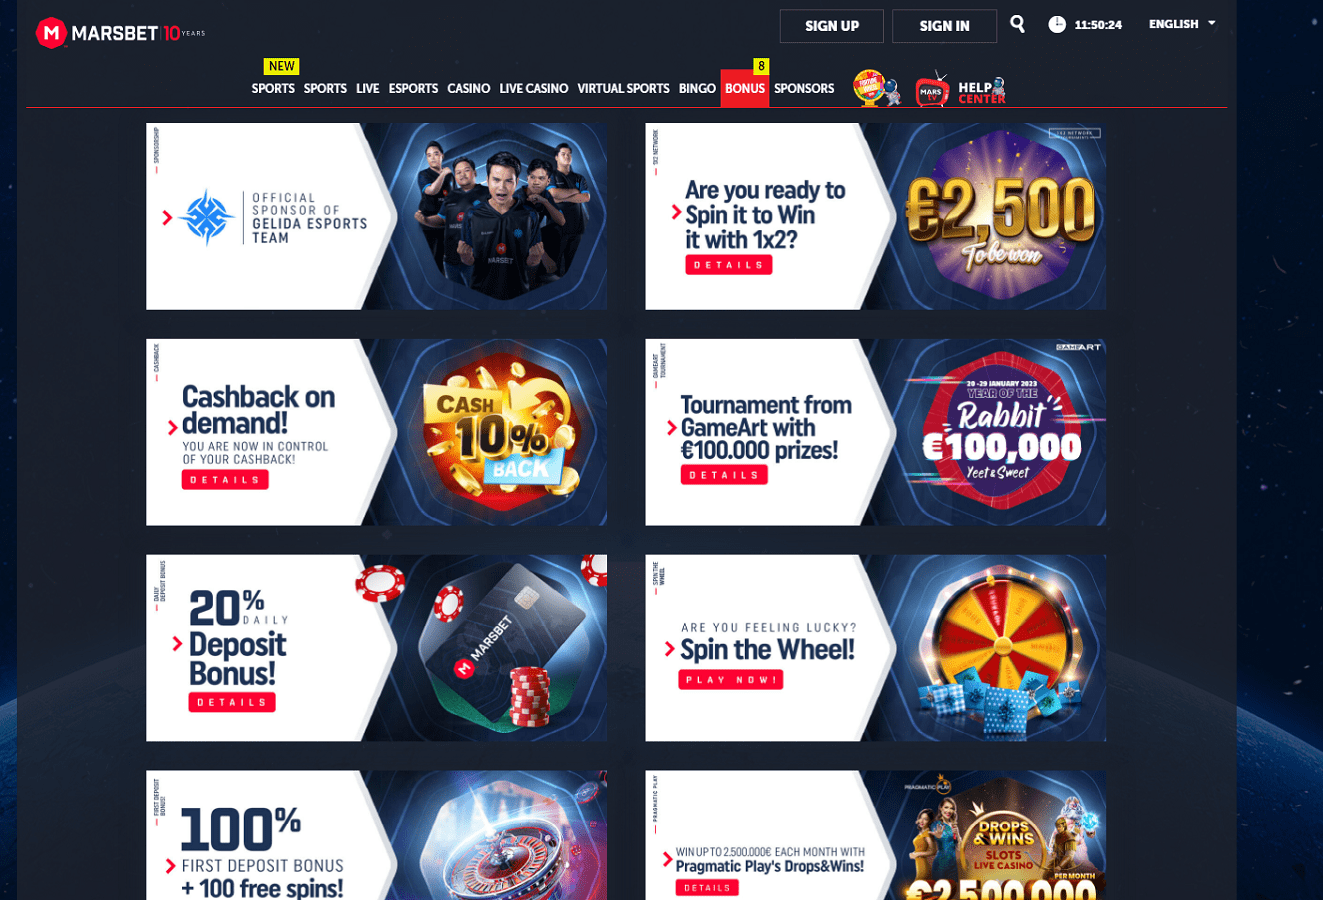 Promotions and Bonuses at MarsBet Casino